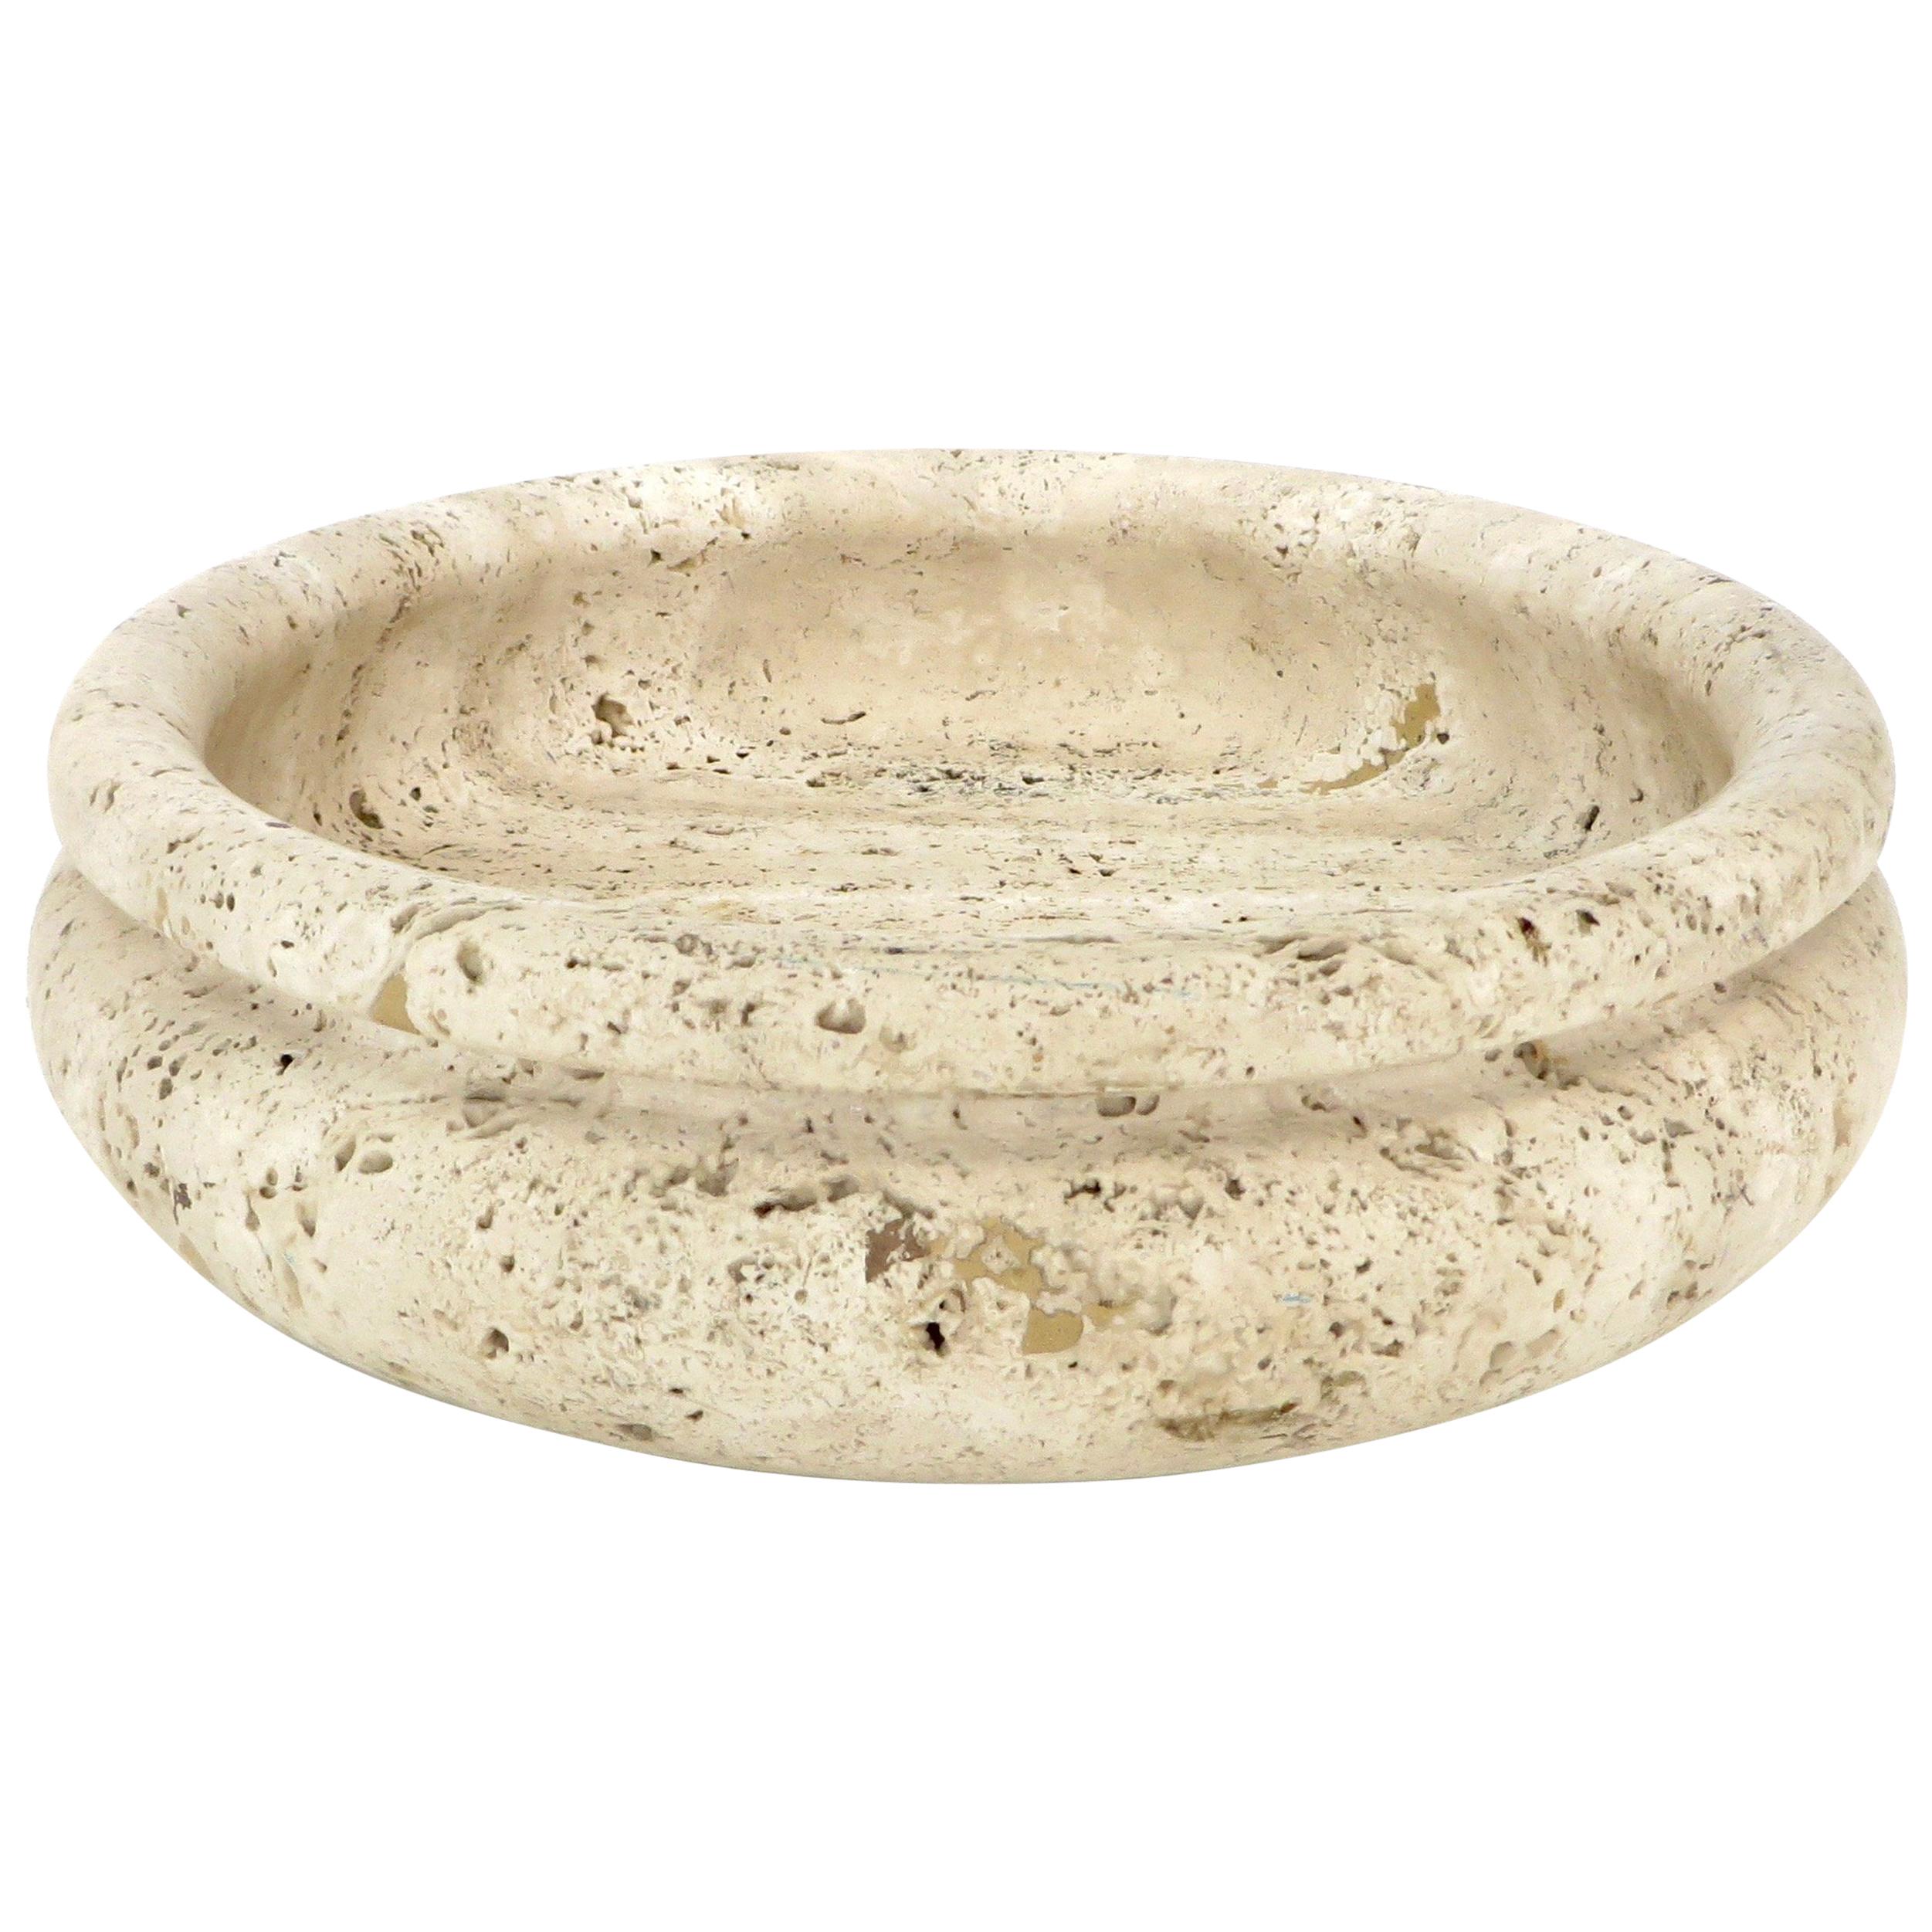 Monumental Italian Travertine Marble Bowl or Dish for Up & Up Di Rosa and Giusti